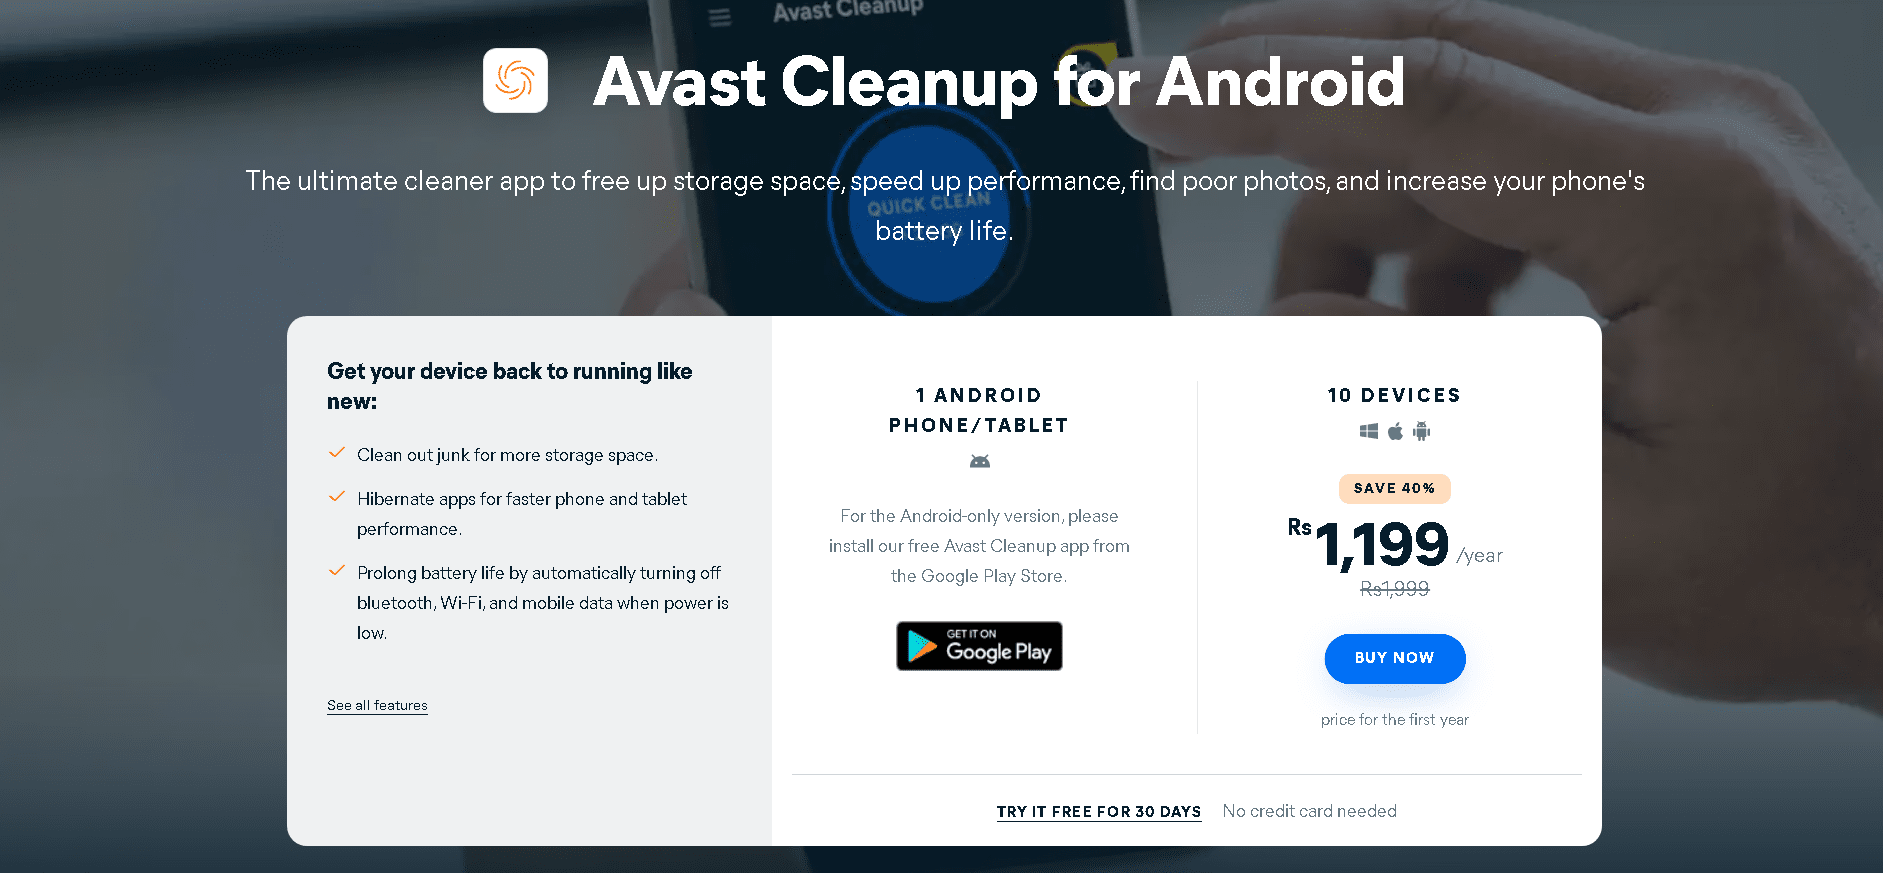 avast cleanup review android